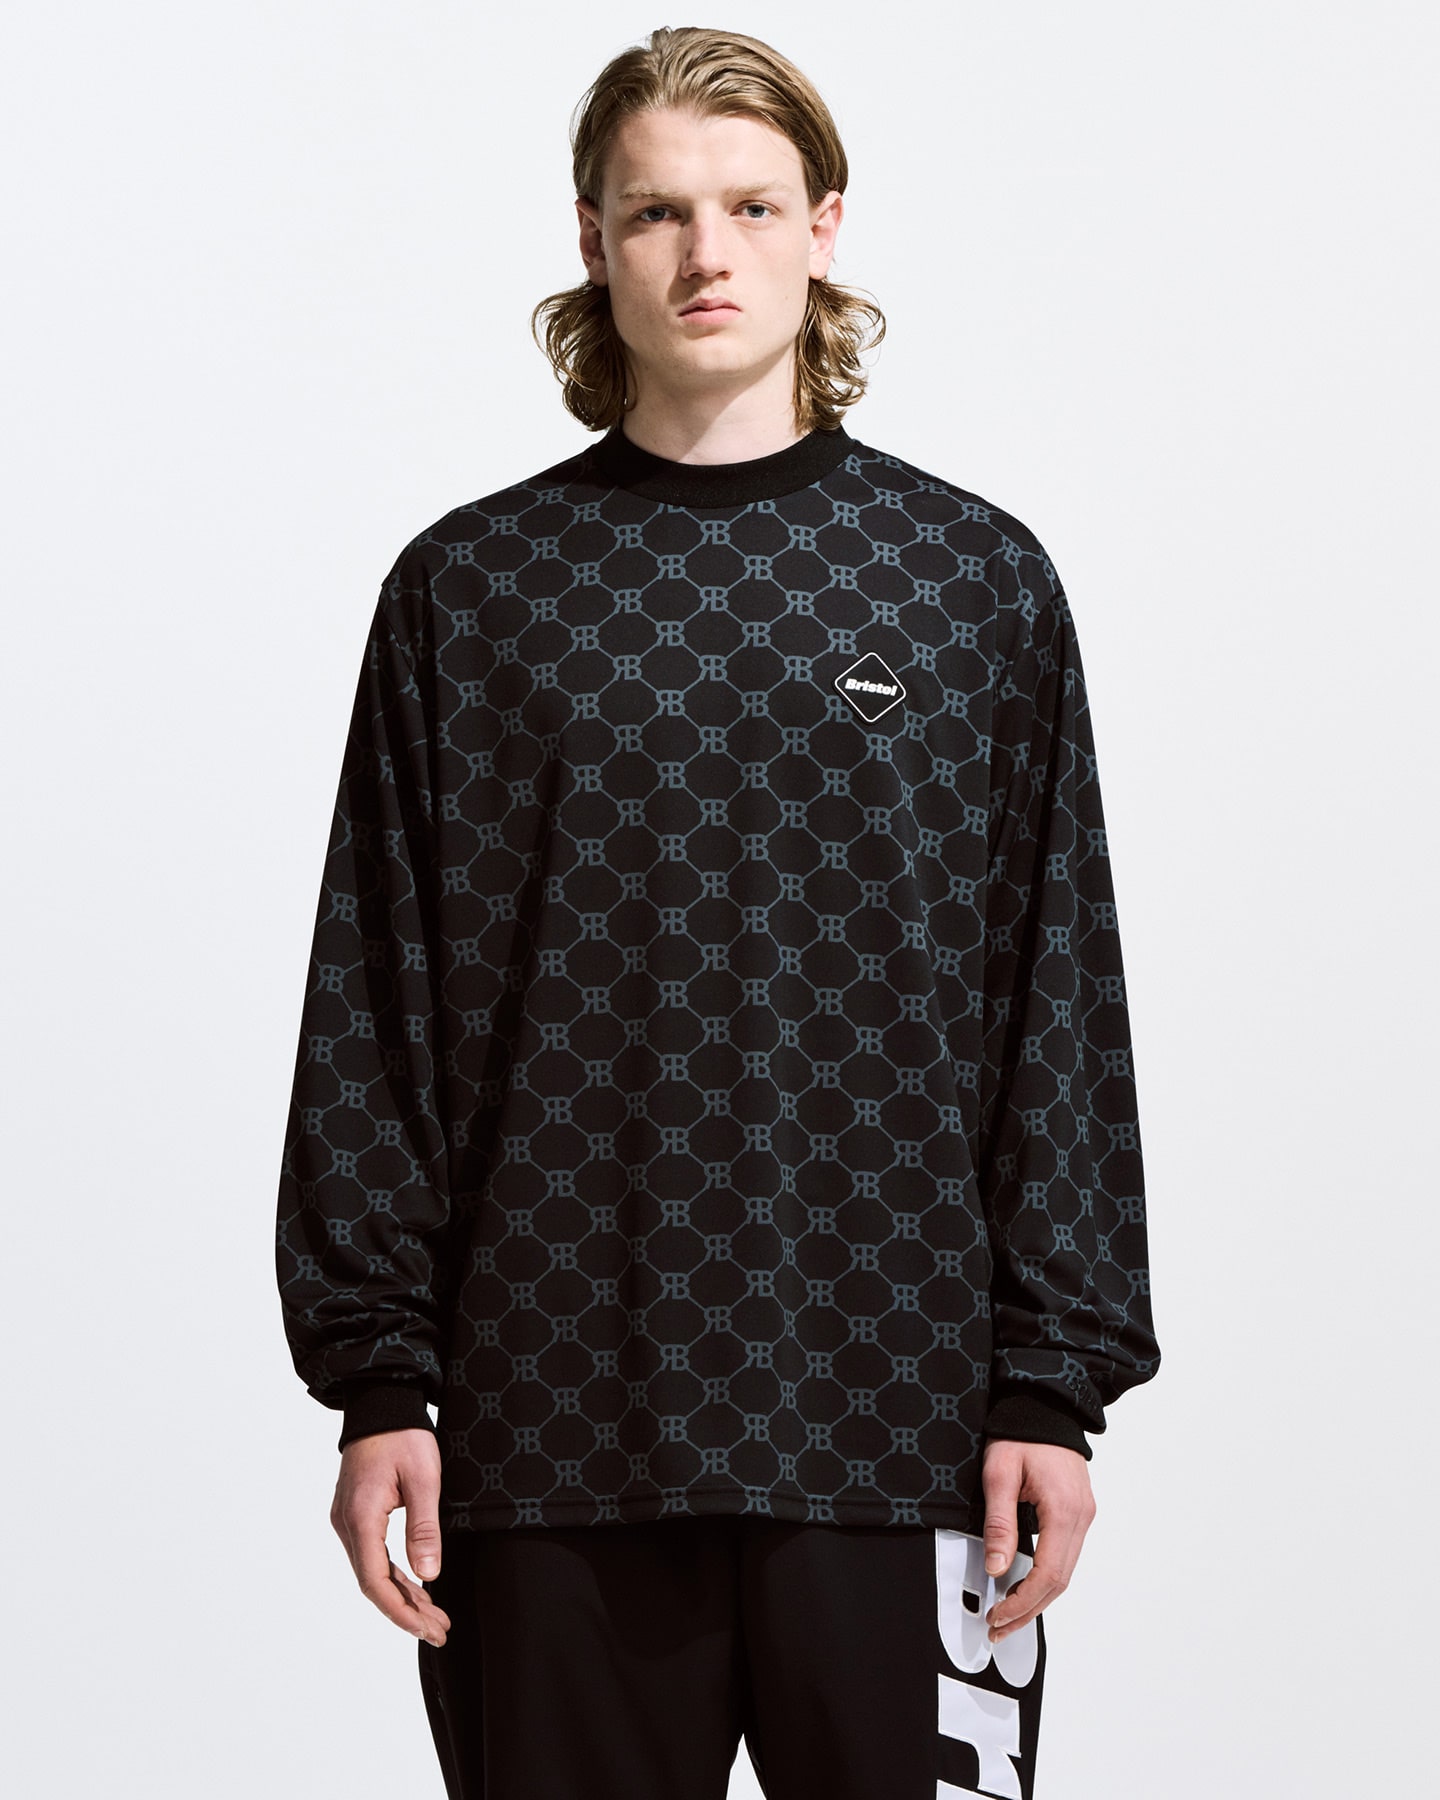 AW23 FCRB MONOGRAM L/S BAGGY TOP-